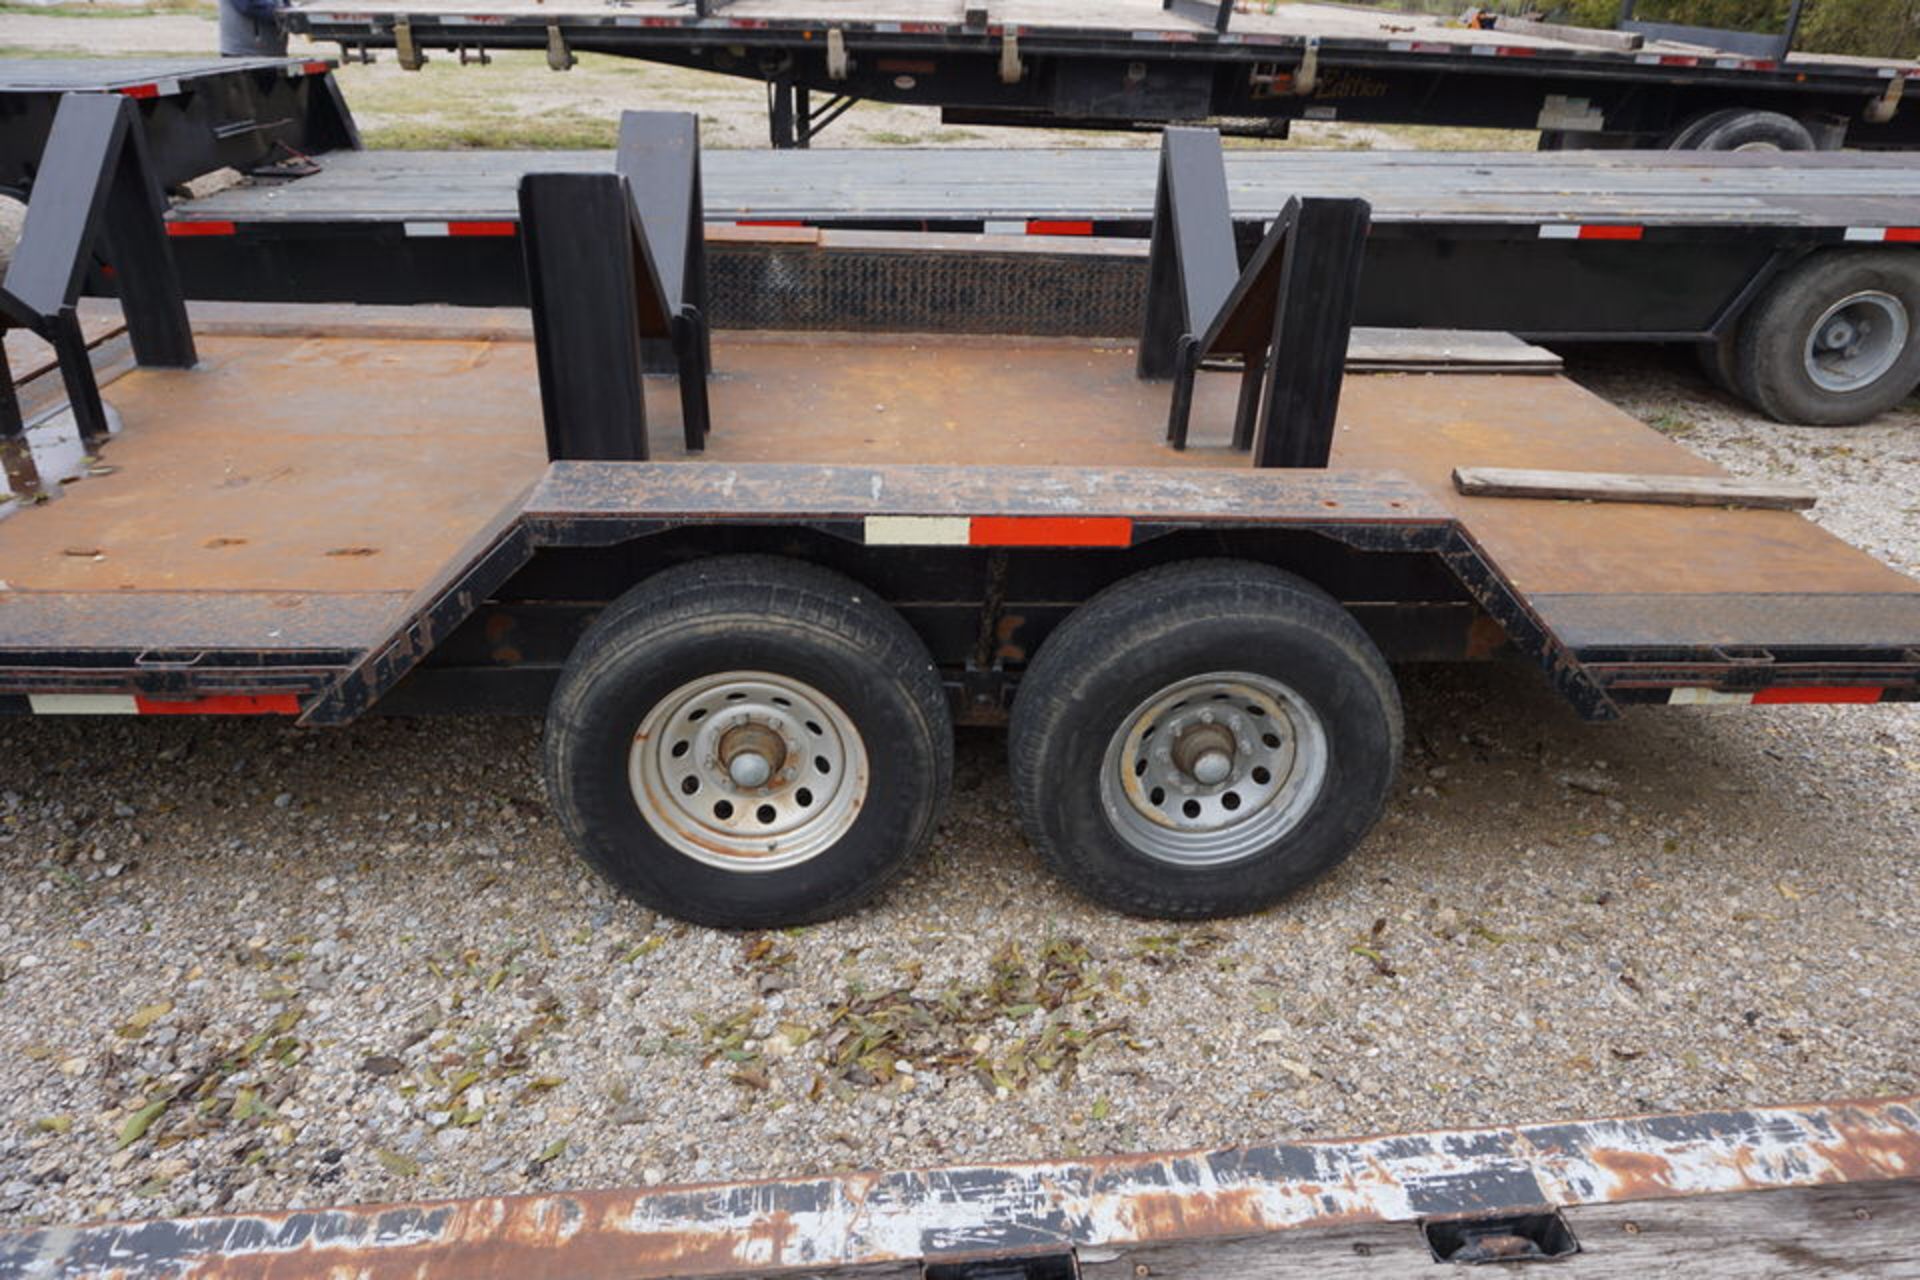 2007 8' x 20' WILDWEST UTILITY TRAILER, (MUST BE REMOVED BY DECEMBER 22) - Image 2 of 7